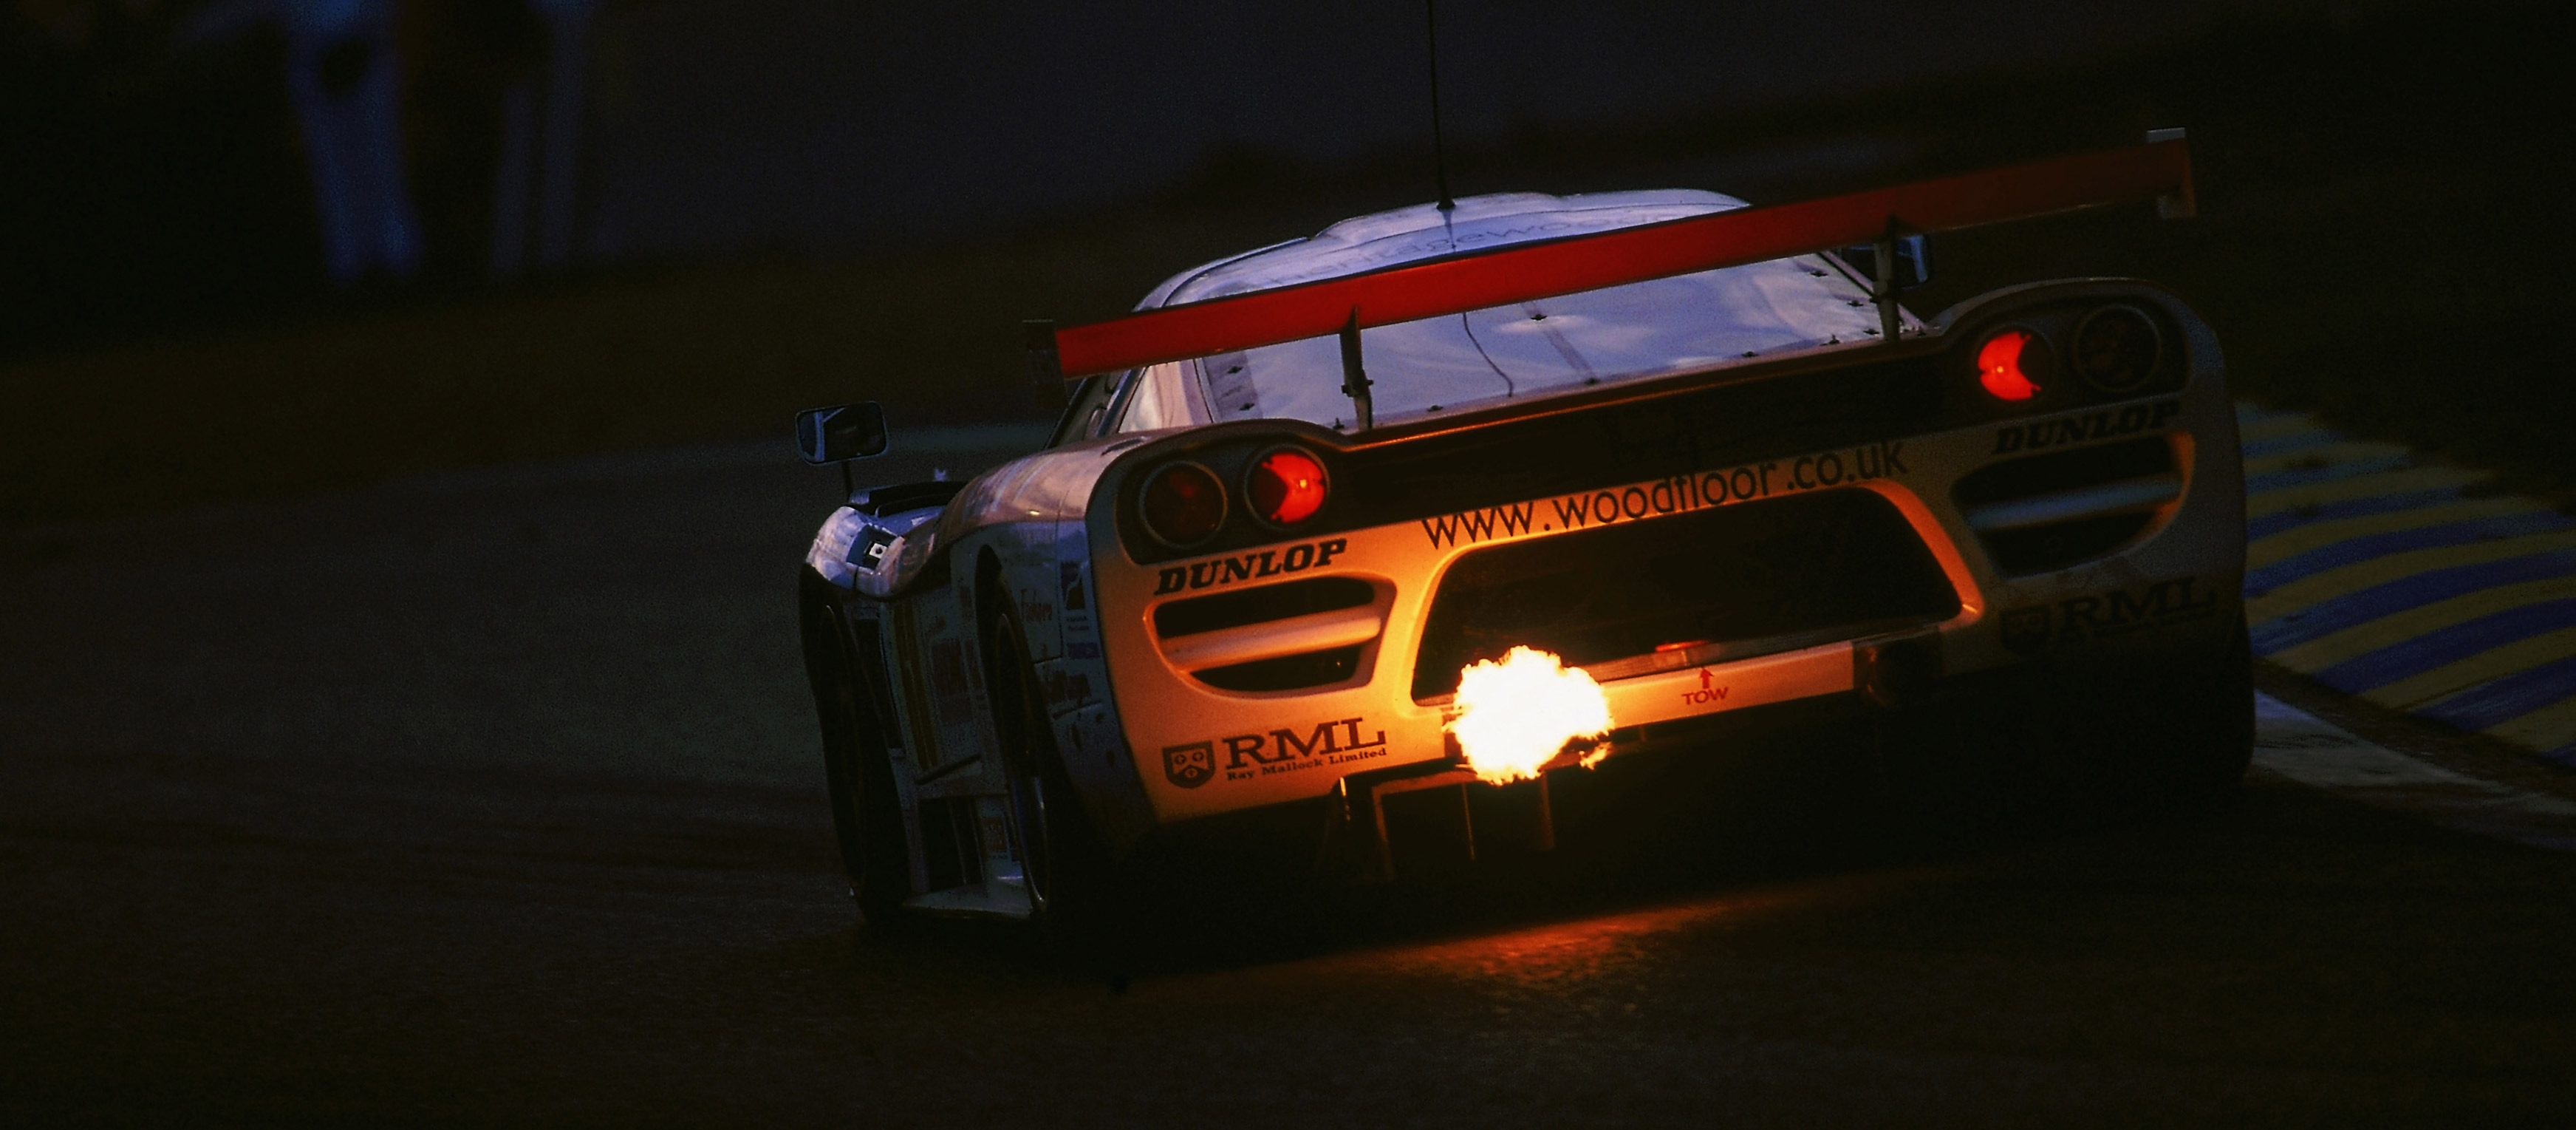 Pictured: A Saleen S7R racer campaigned by RML at the 24 Hours of Le Mans in 2001. Note the RML sticker illuminated by the car’s flames.